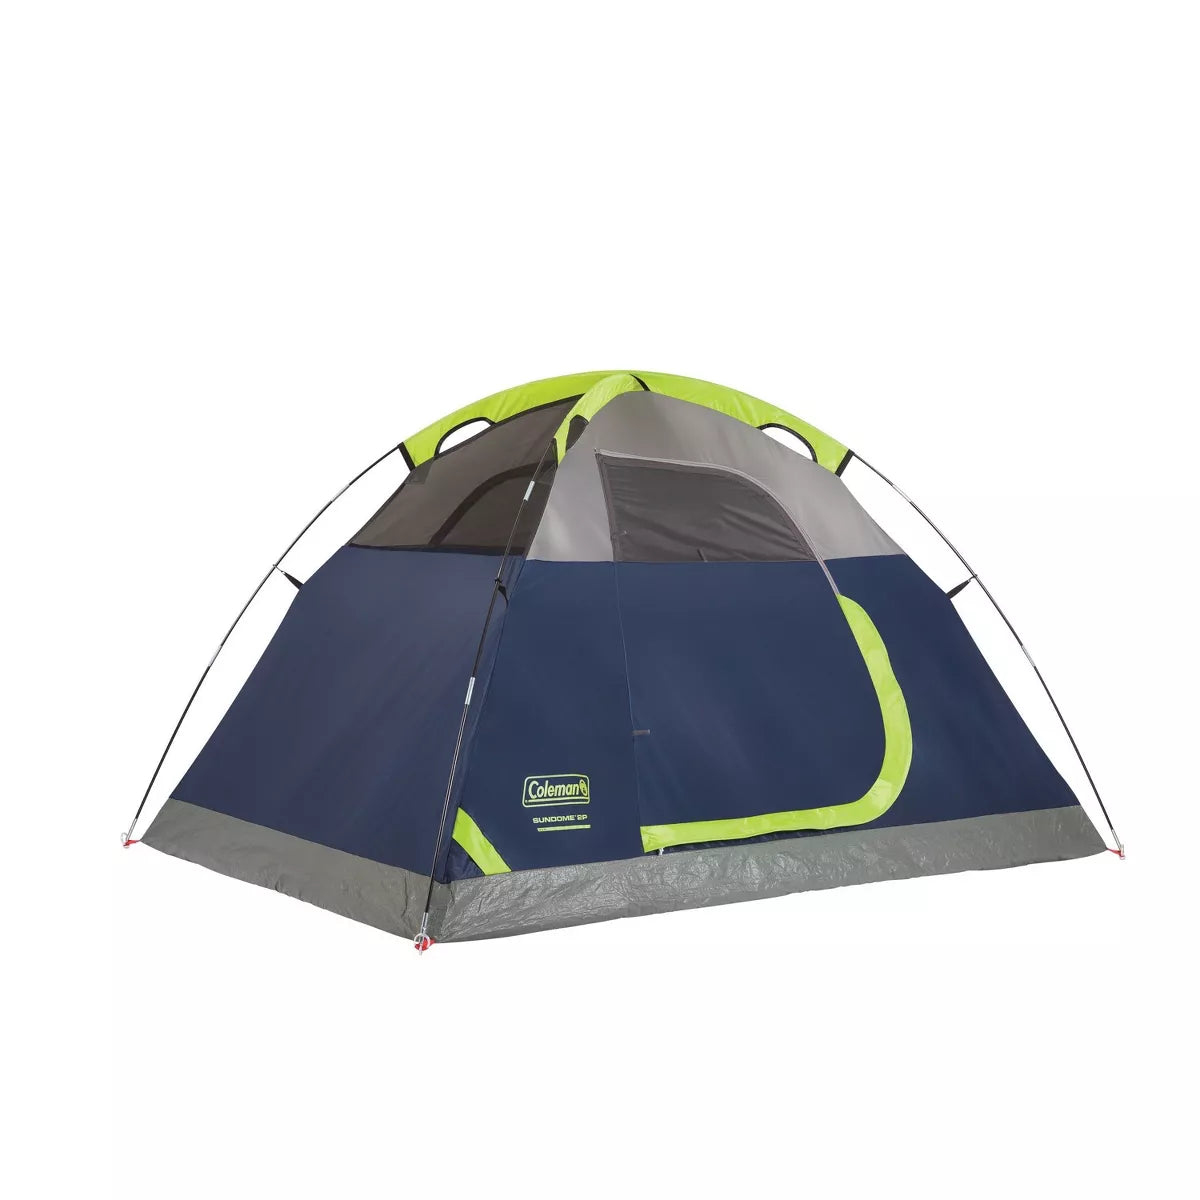 COLEMAN SUNDOME 2-PERSON CAMPING TENT NAVY